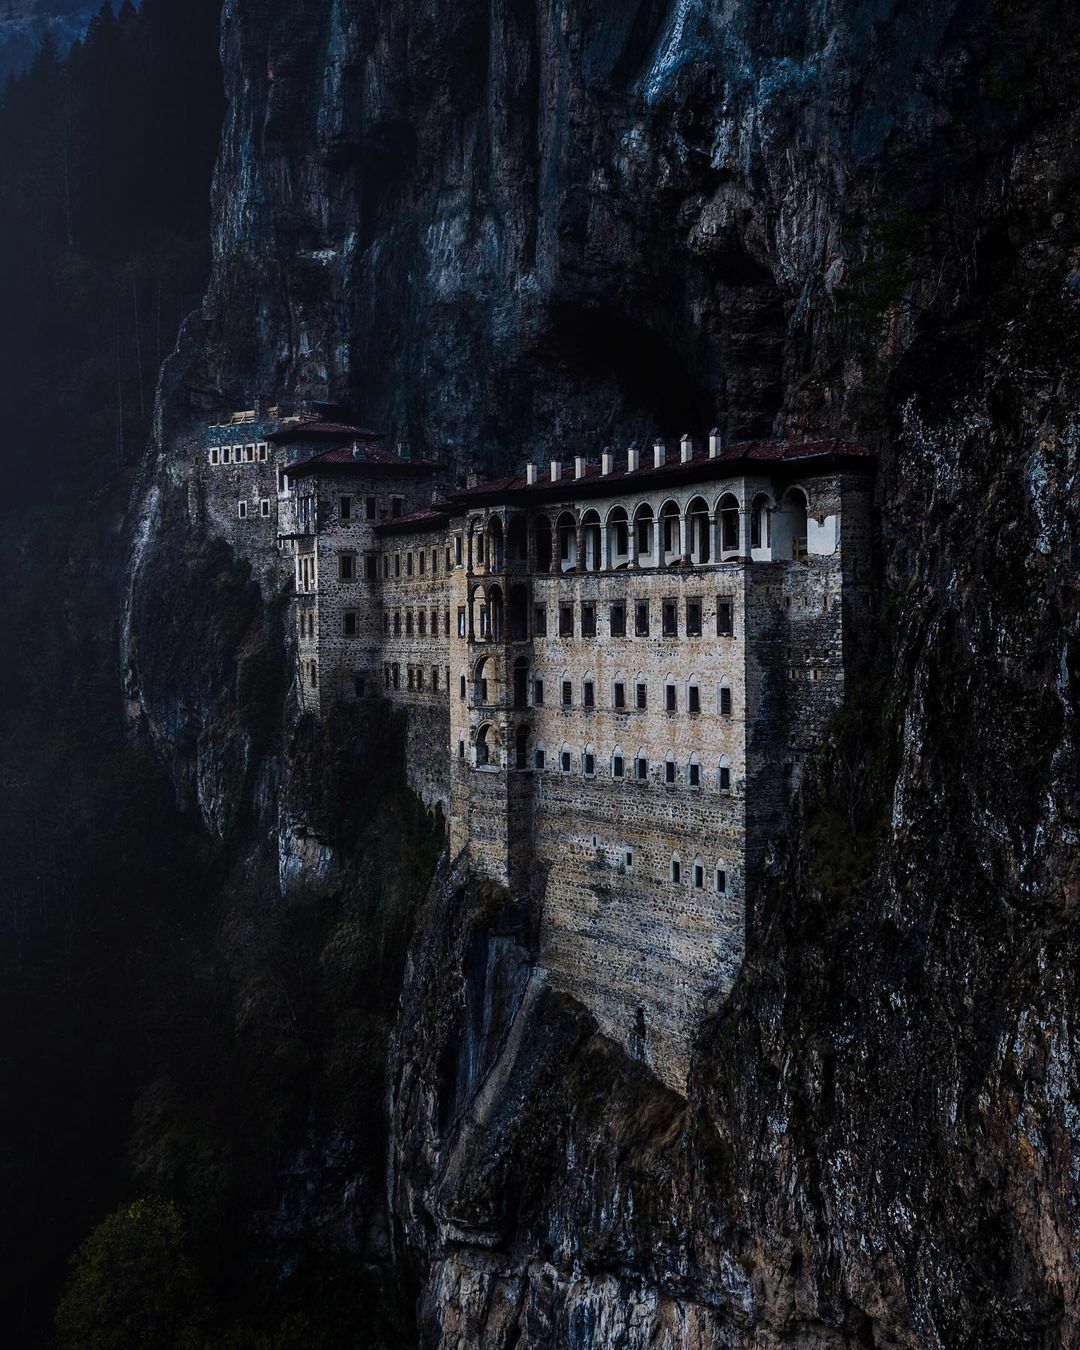 Sumela Monastery, A Greek Orthodox Monastery Originally Established Around Ad 386, Nestled In A Steep Cliff At An Altitude Of 1200 Meters, Trabzon Province, Turkey